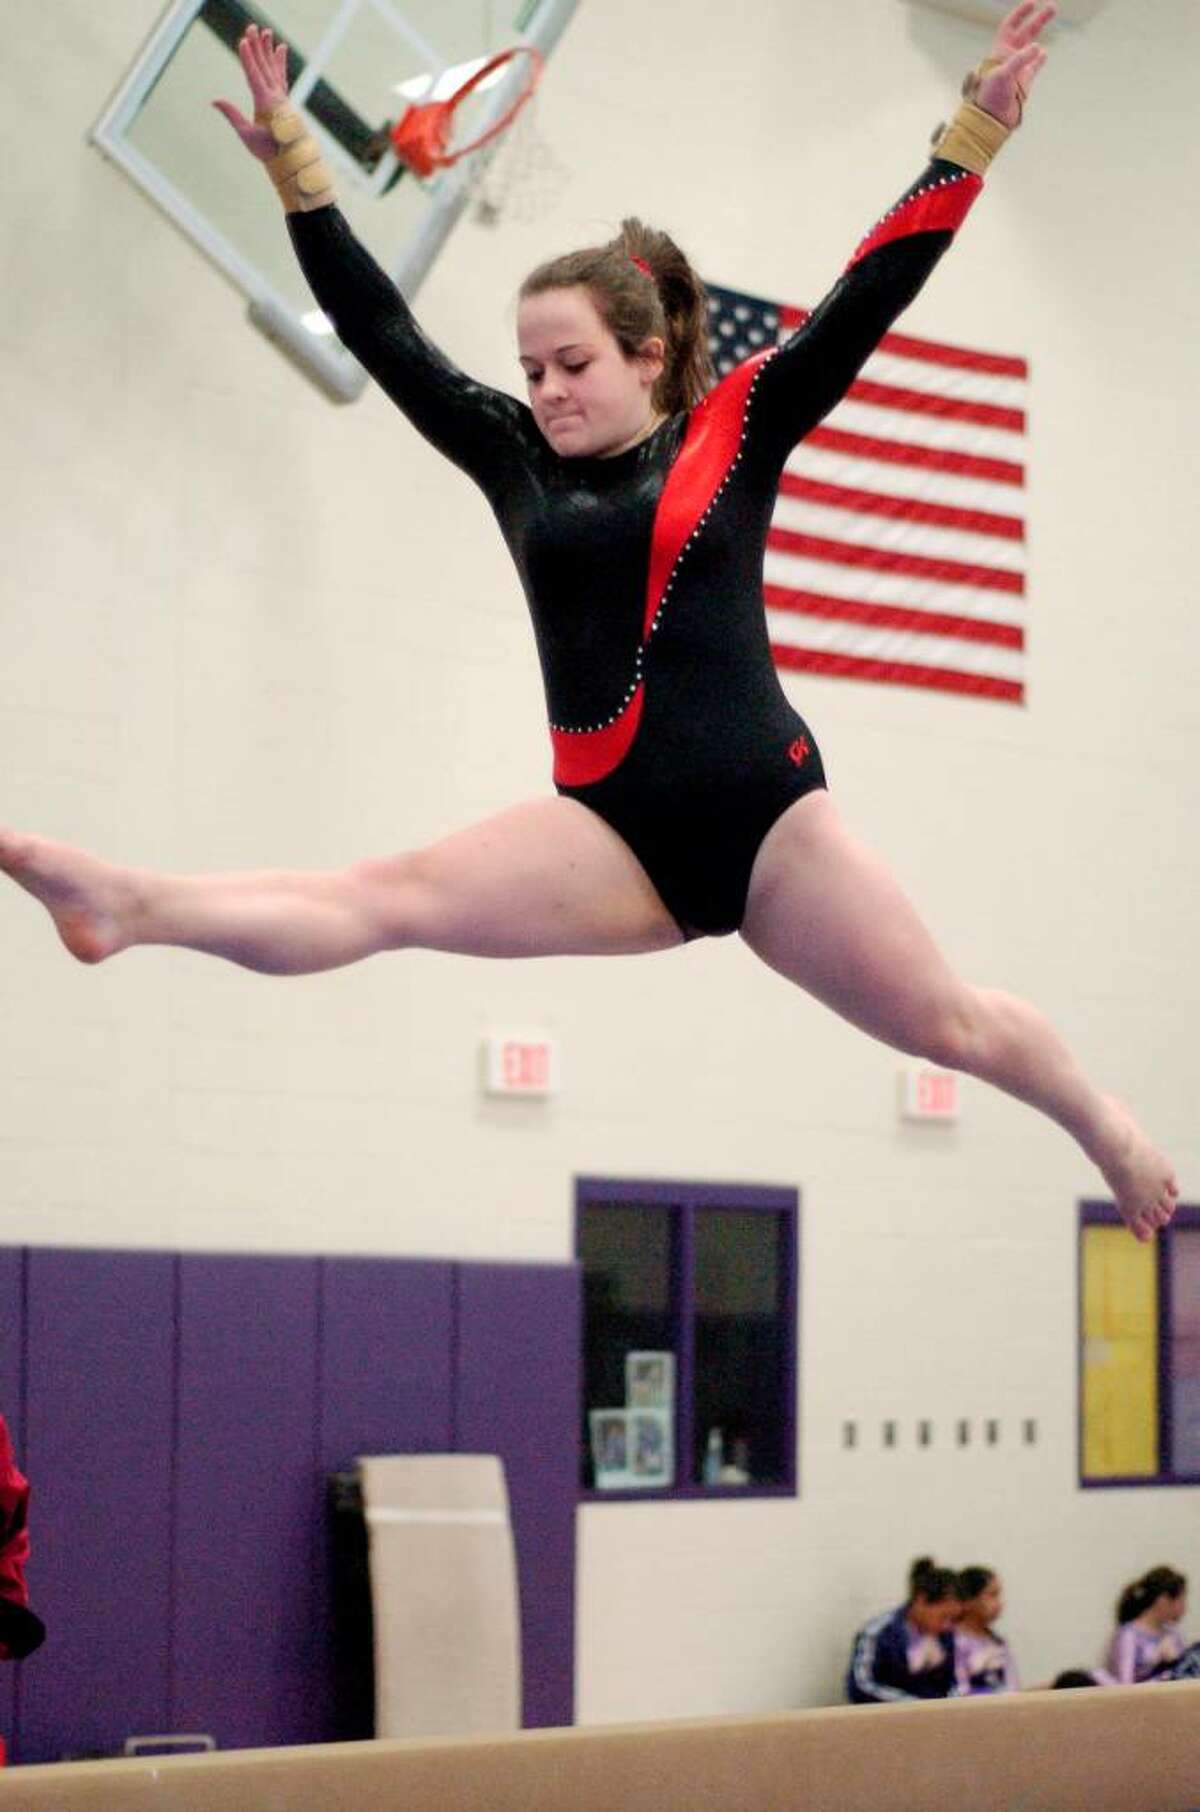 Jaclyn Golet from Pomperaug competes at gymnastics meet at Westhill High School in Stamford, Conn. on Monday January 18, 2010. Westhill and Pomperaug are two of the schools competing.